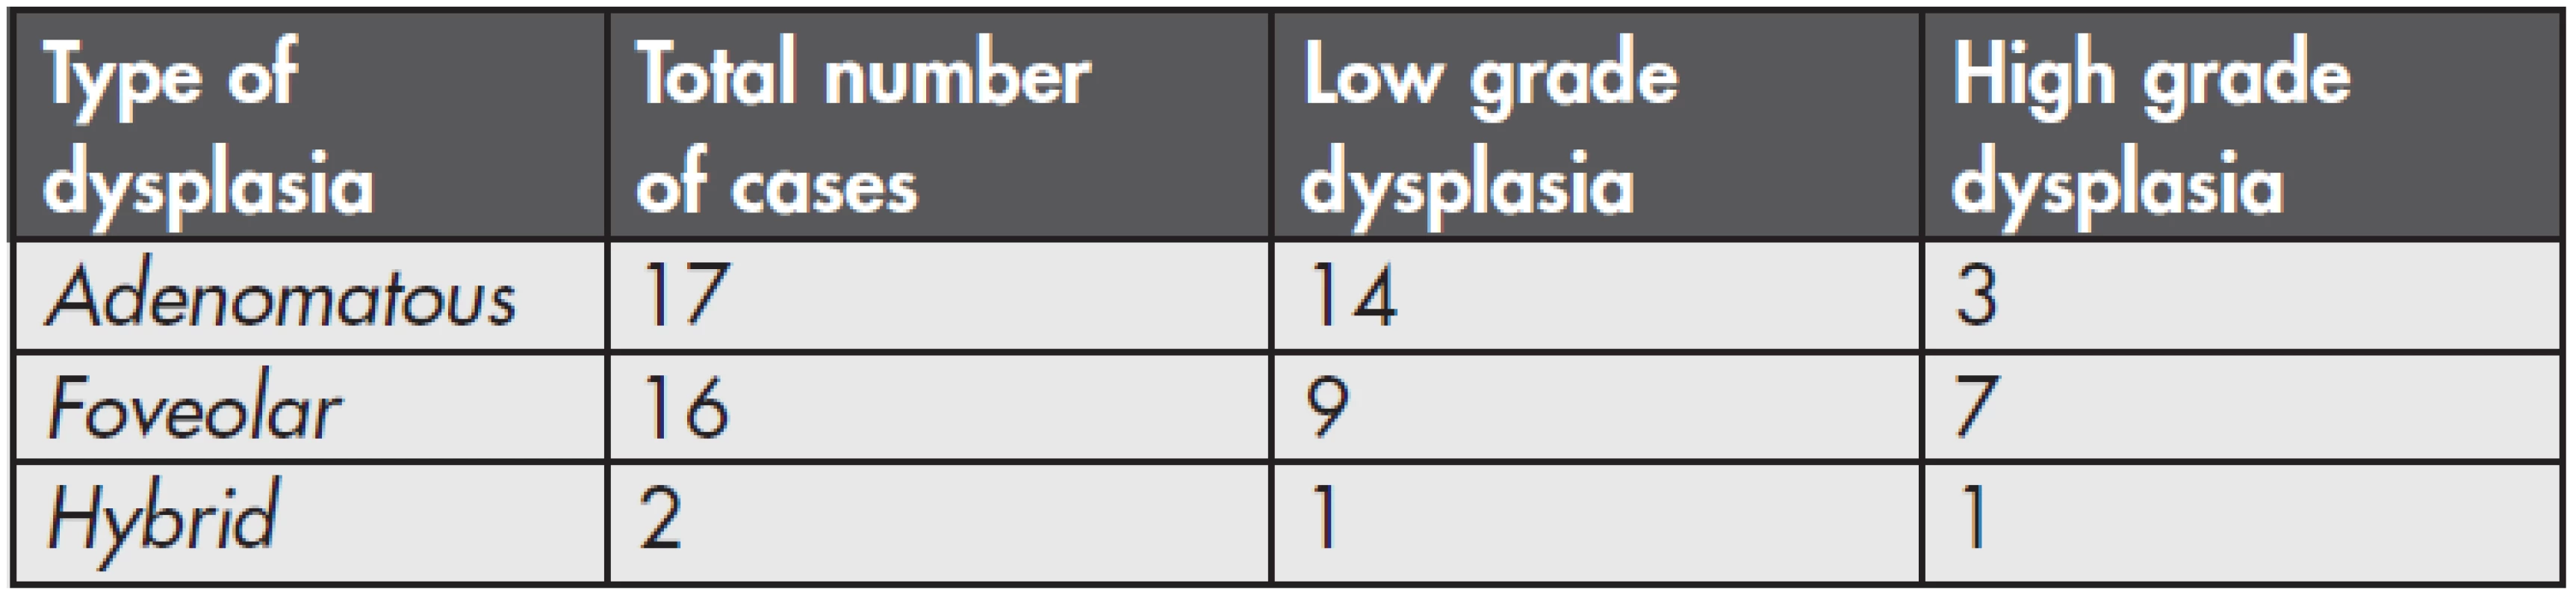 Number and grading of the dysplasia types in the series.